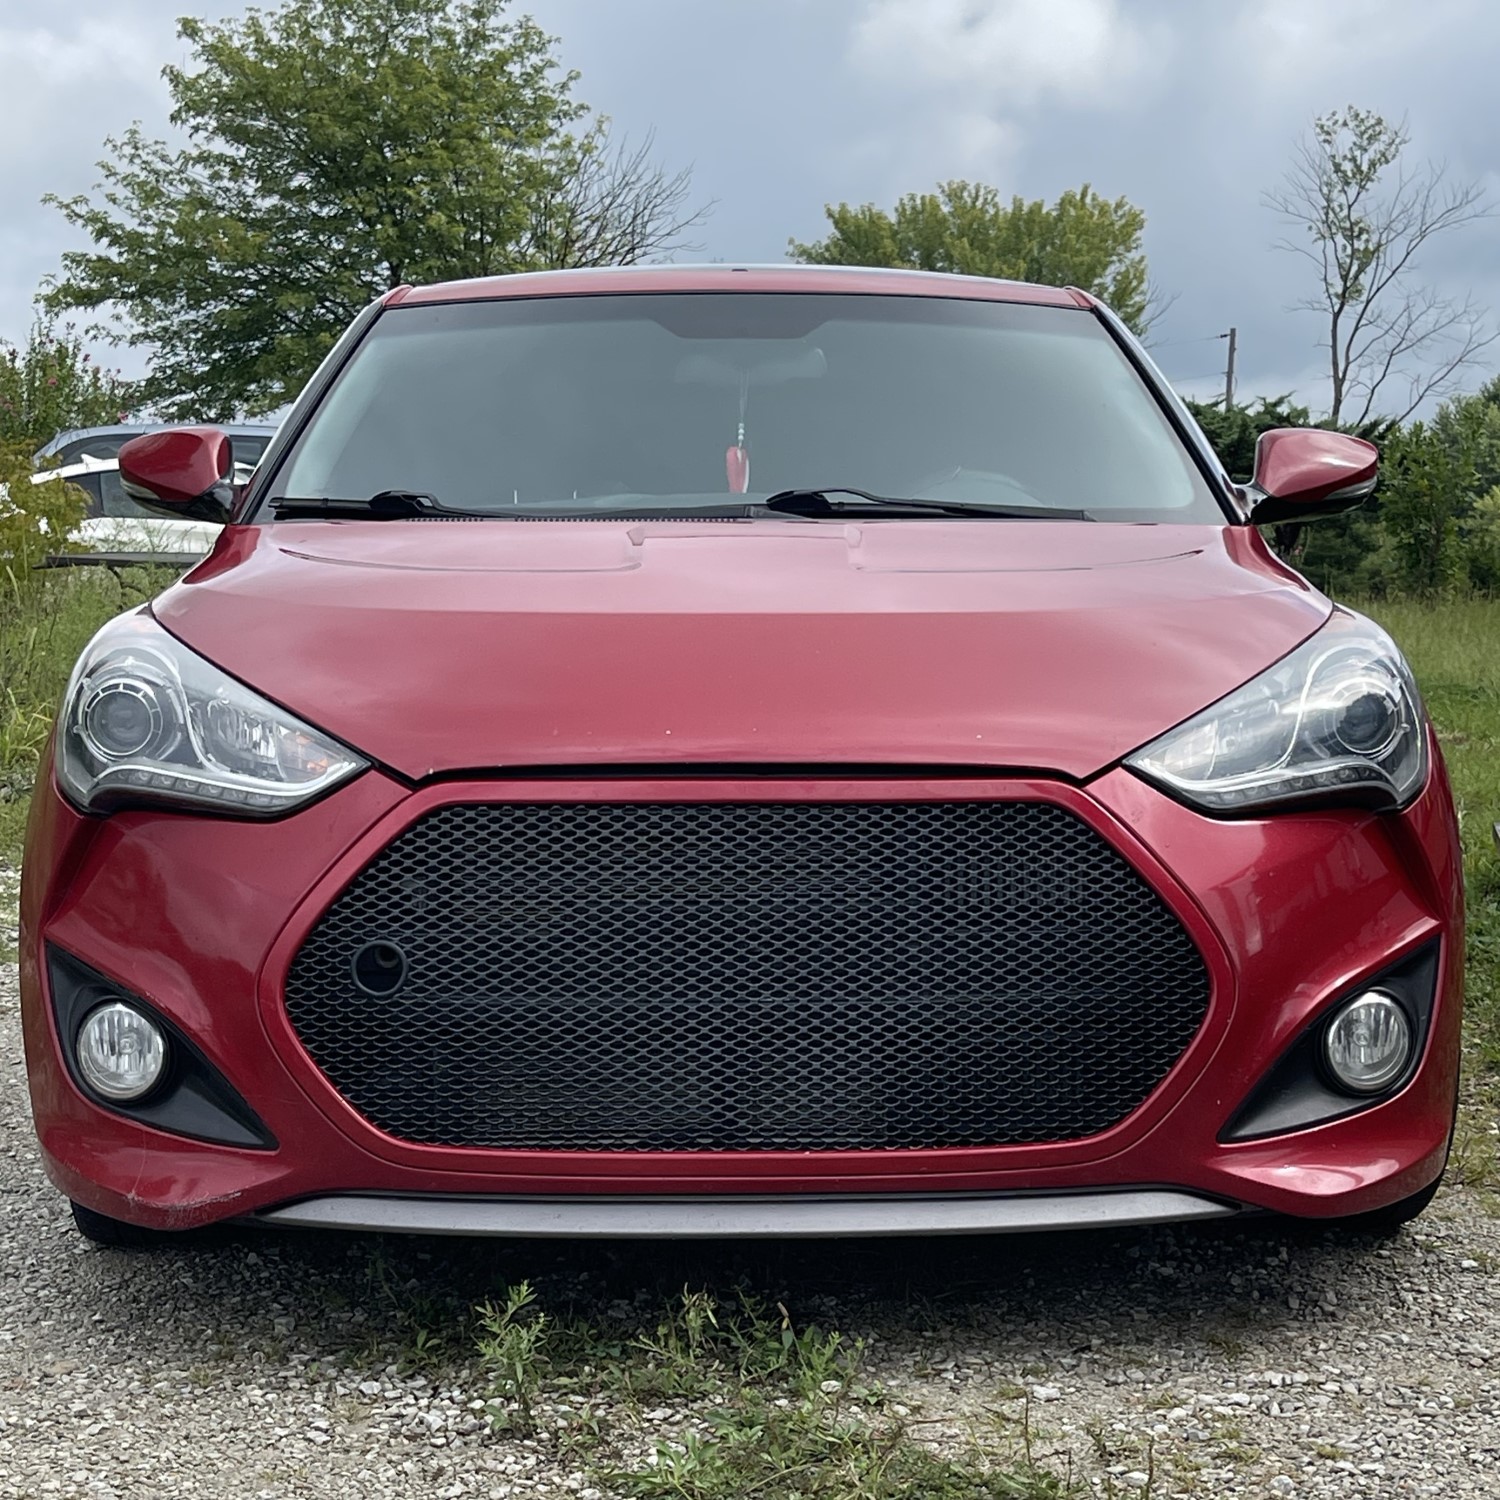 Red Hot Style: Custom Grille Upgrade for 1st Generation Hyundai Veloster